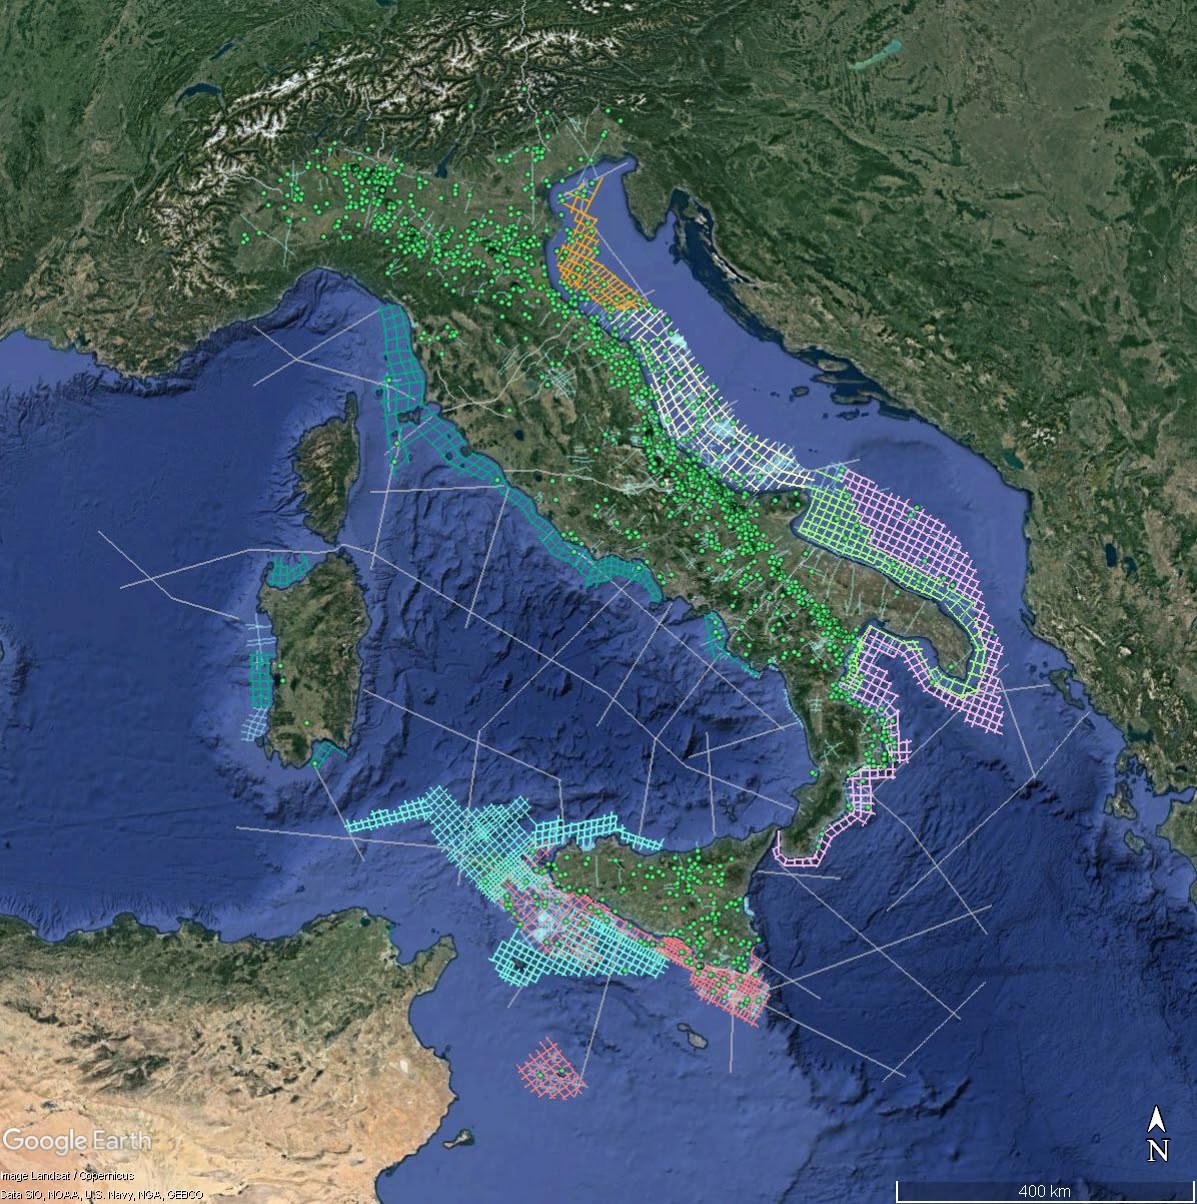 The lab provides enhanced navigation of this important Italian database (ViDEPI), including data from expired oil exploration permits.